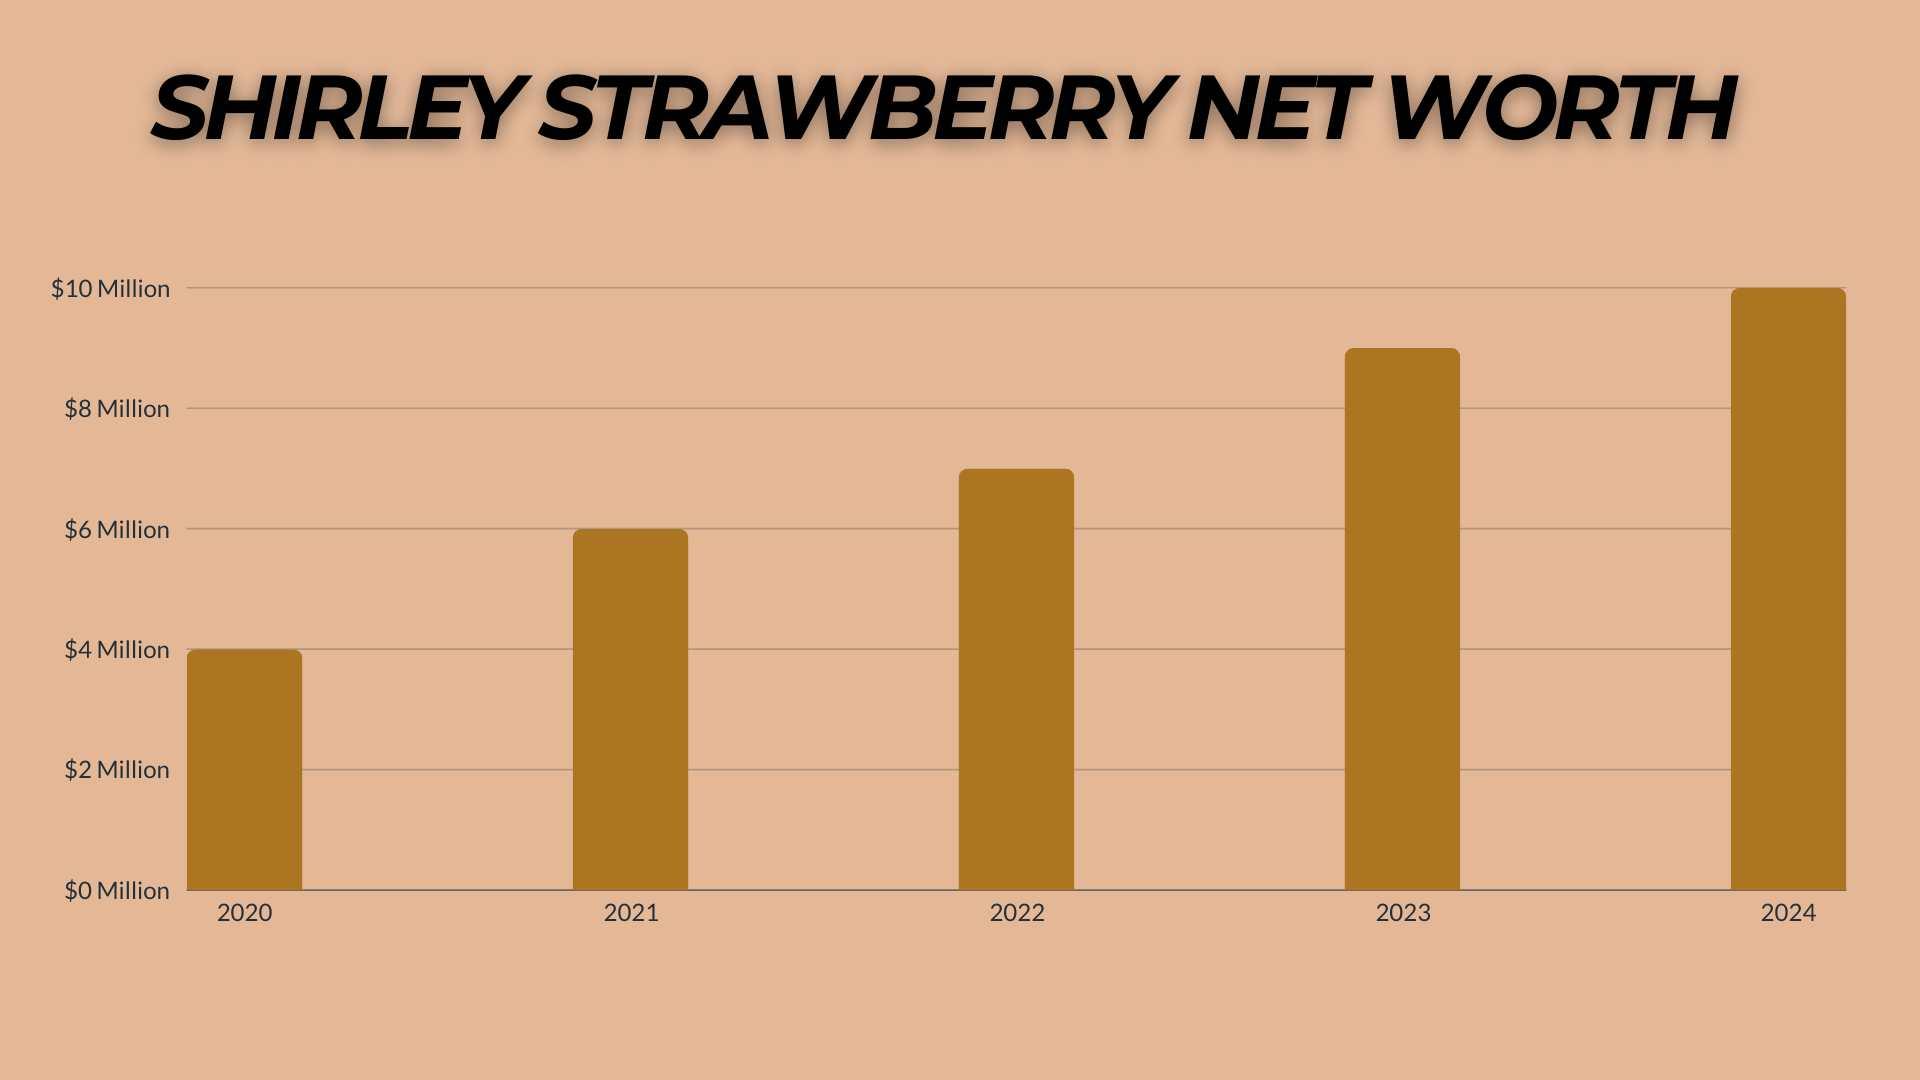 Shirley Strawberry Net Worth Growth Rate: